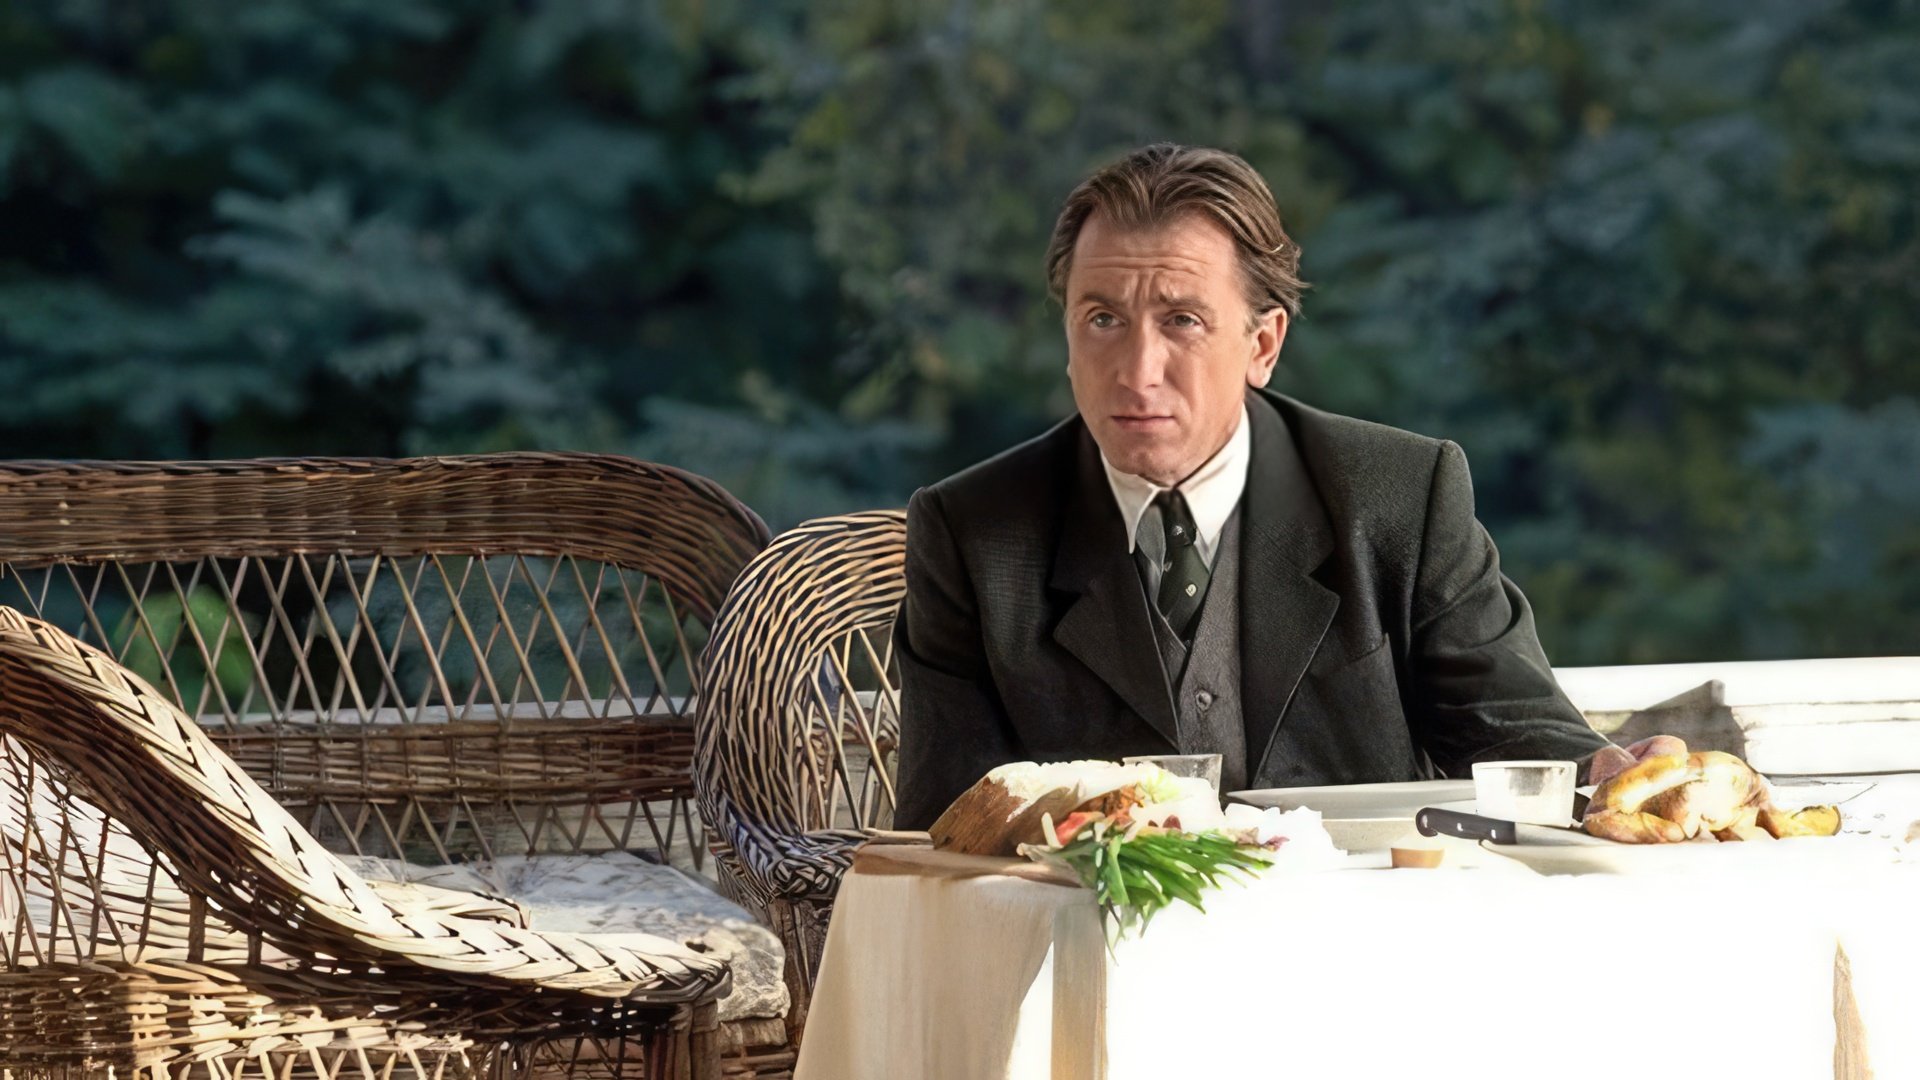 Tim Roth in Francis Ford Coppola’s drama Youth Without Youth